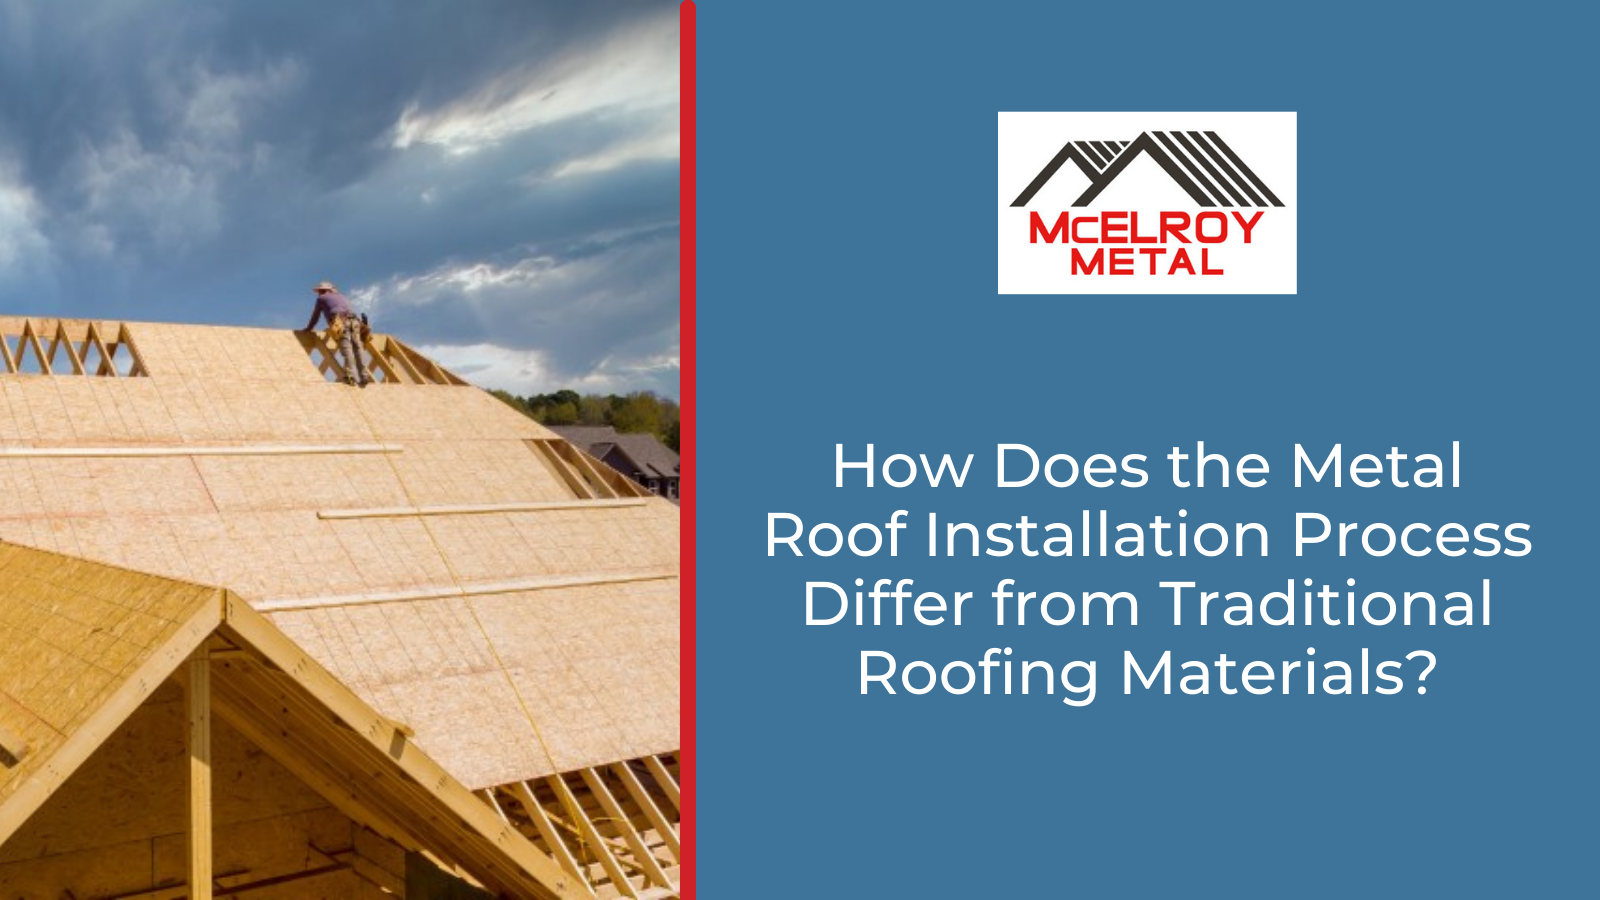 How Does the Metal Roof Installation Process Differ from Traditional Roofing Materials?